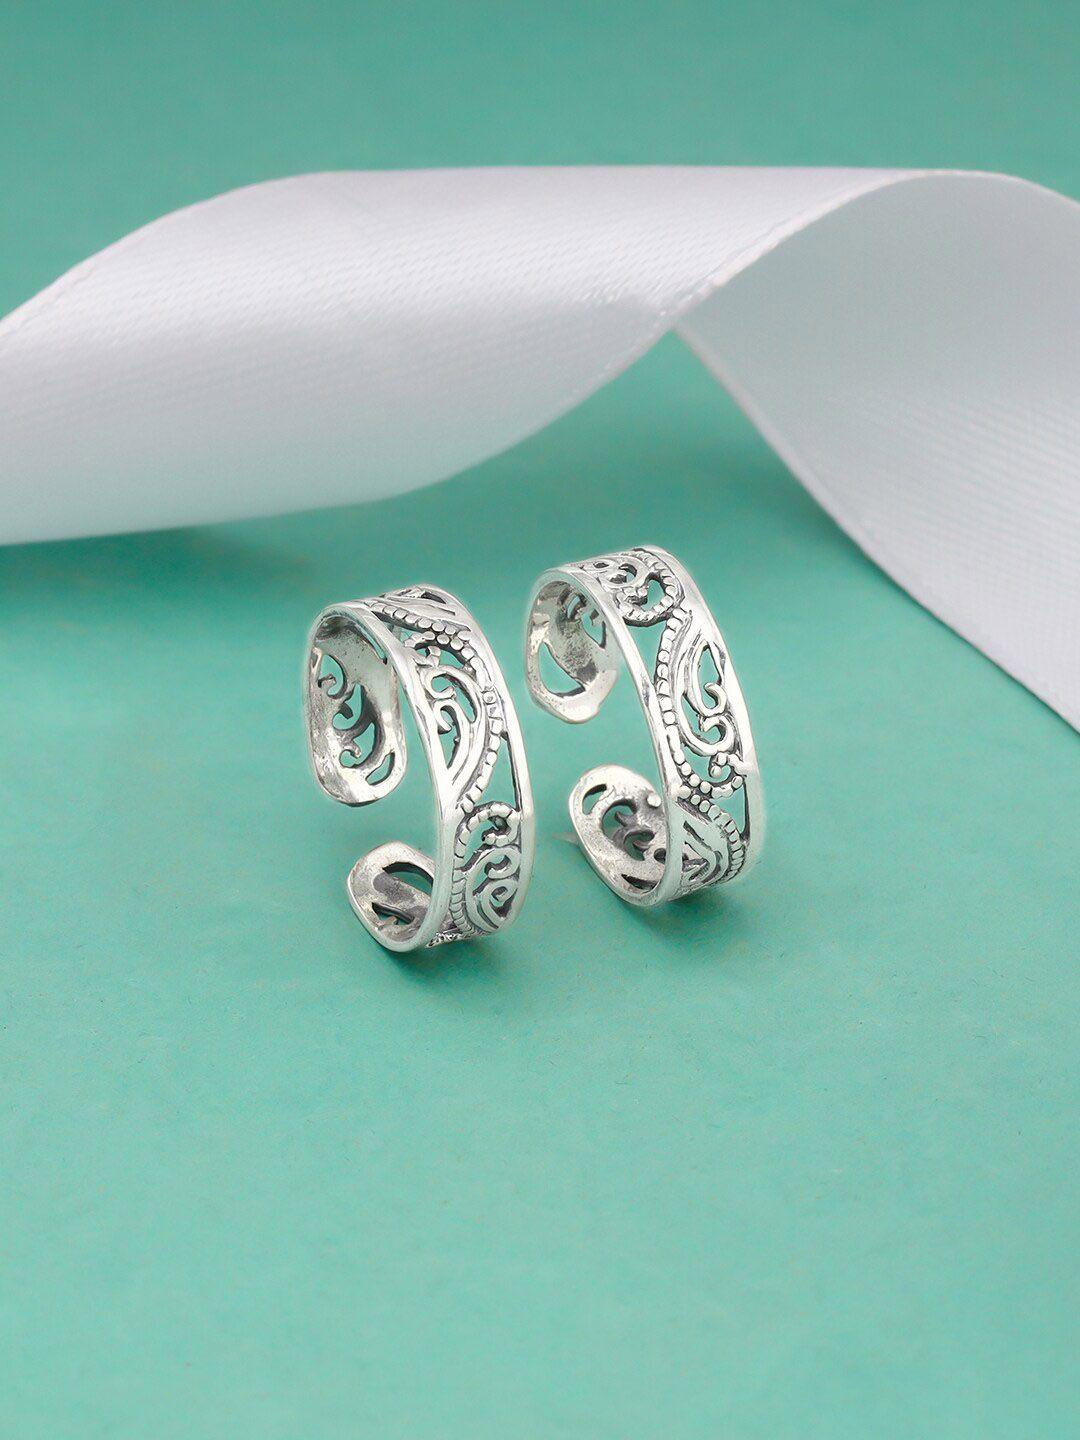 giva-set-of-2-rhodium-plated-adjustable-925-sterling-silver-toe-rings